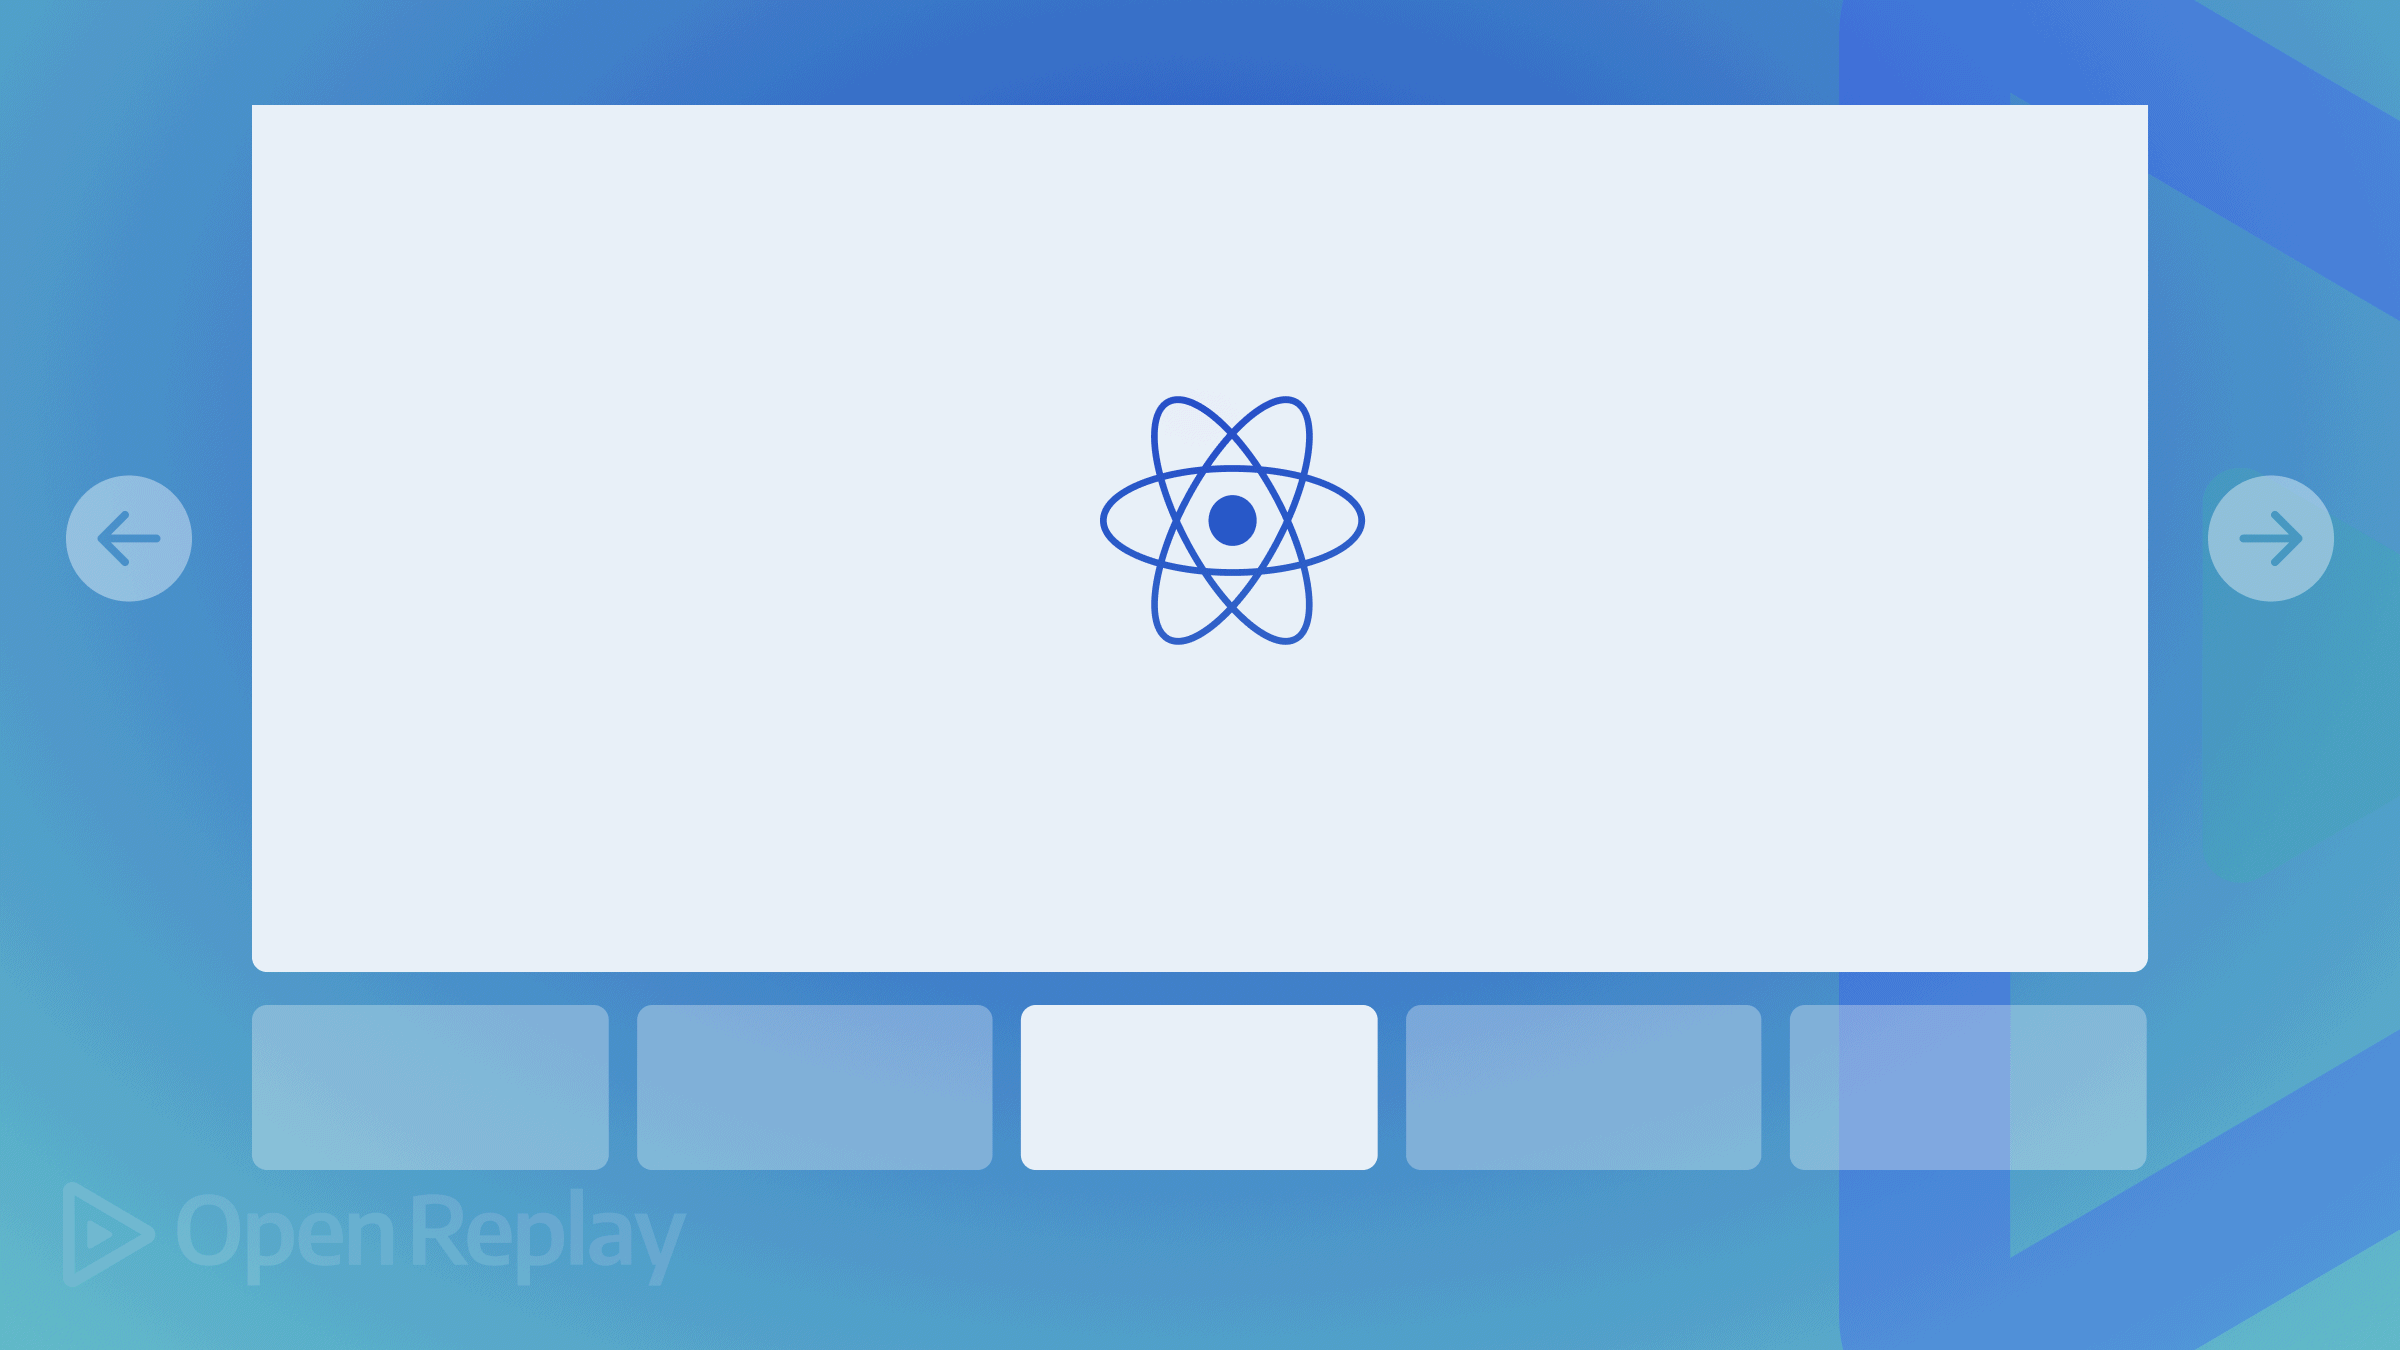 Build an elegant gallery with React-Responsive-Carousel